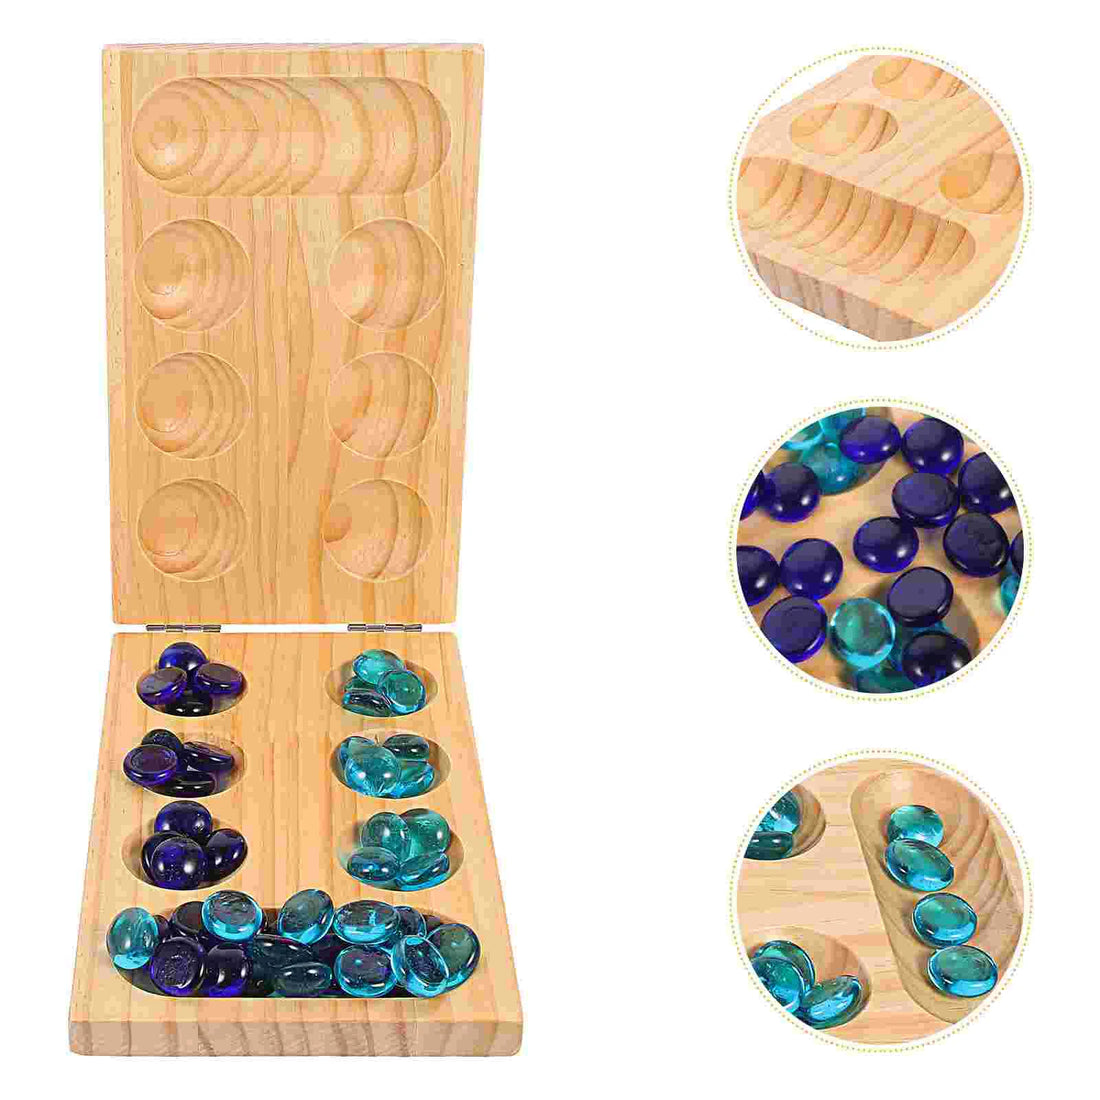 Wooden Toy Mancala Board Game Portable Mancale Aldult Plaything Foldable Gemstone Chess Child